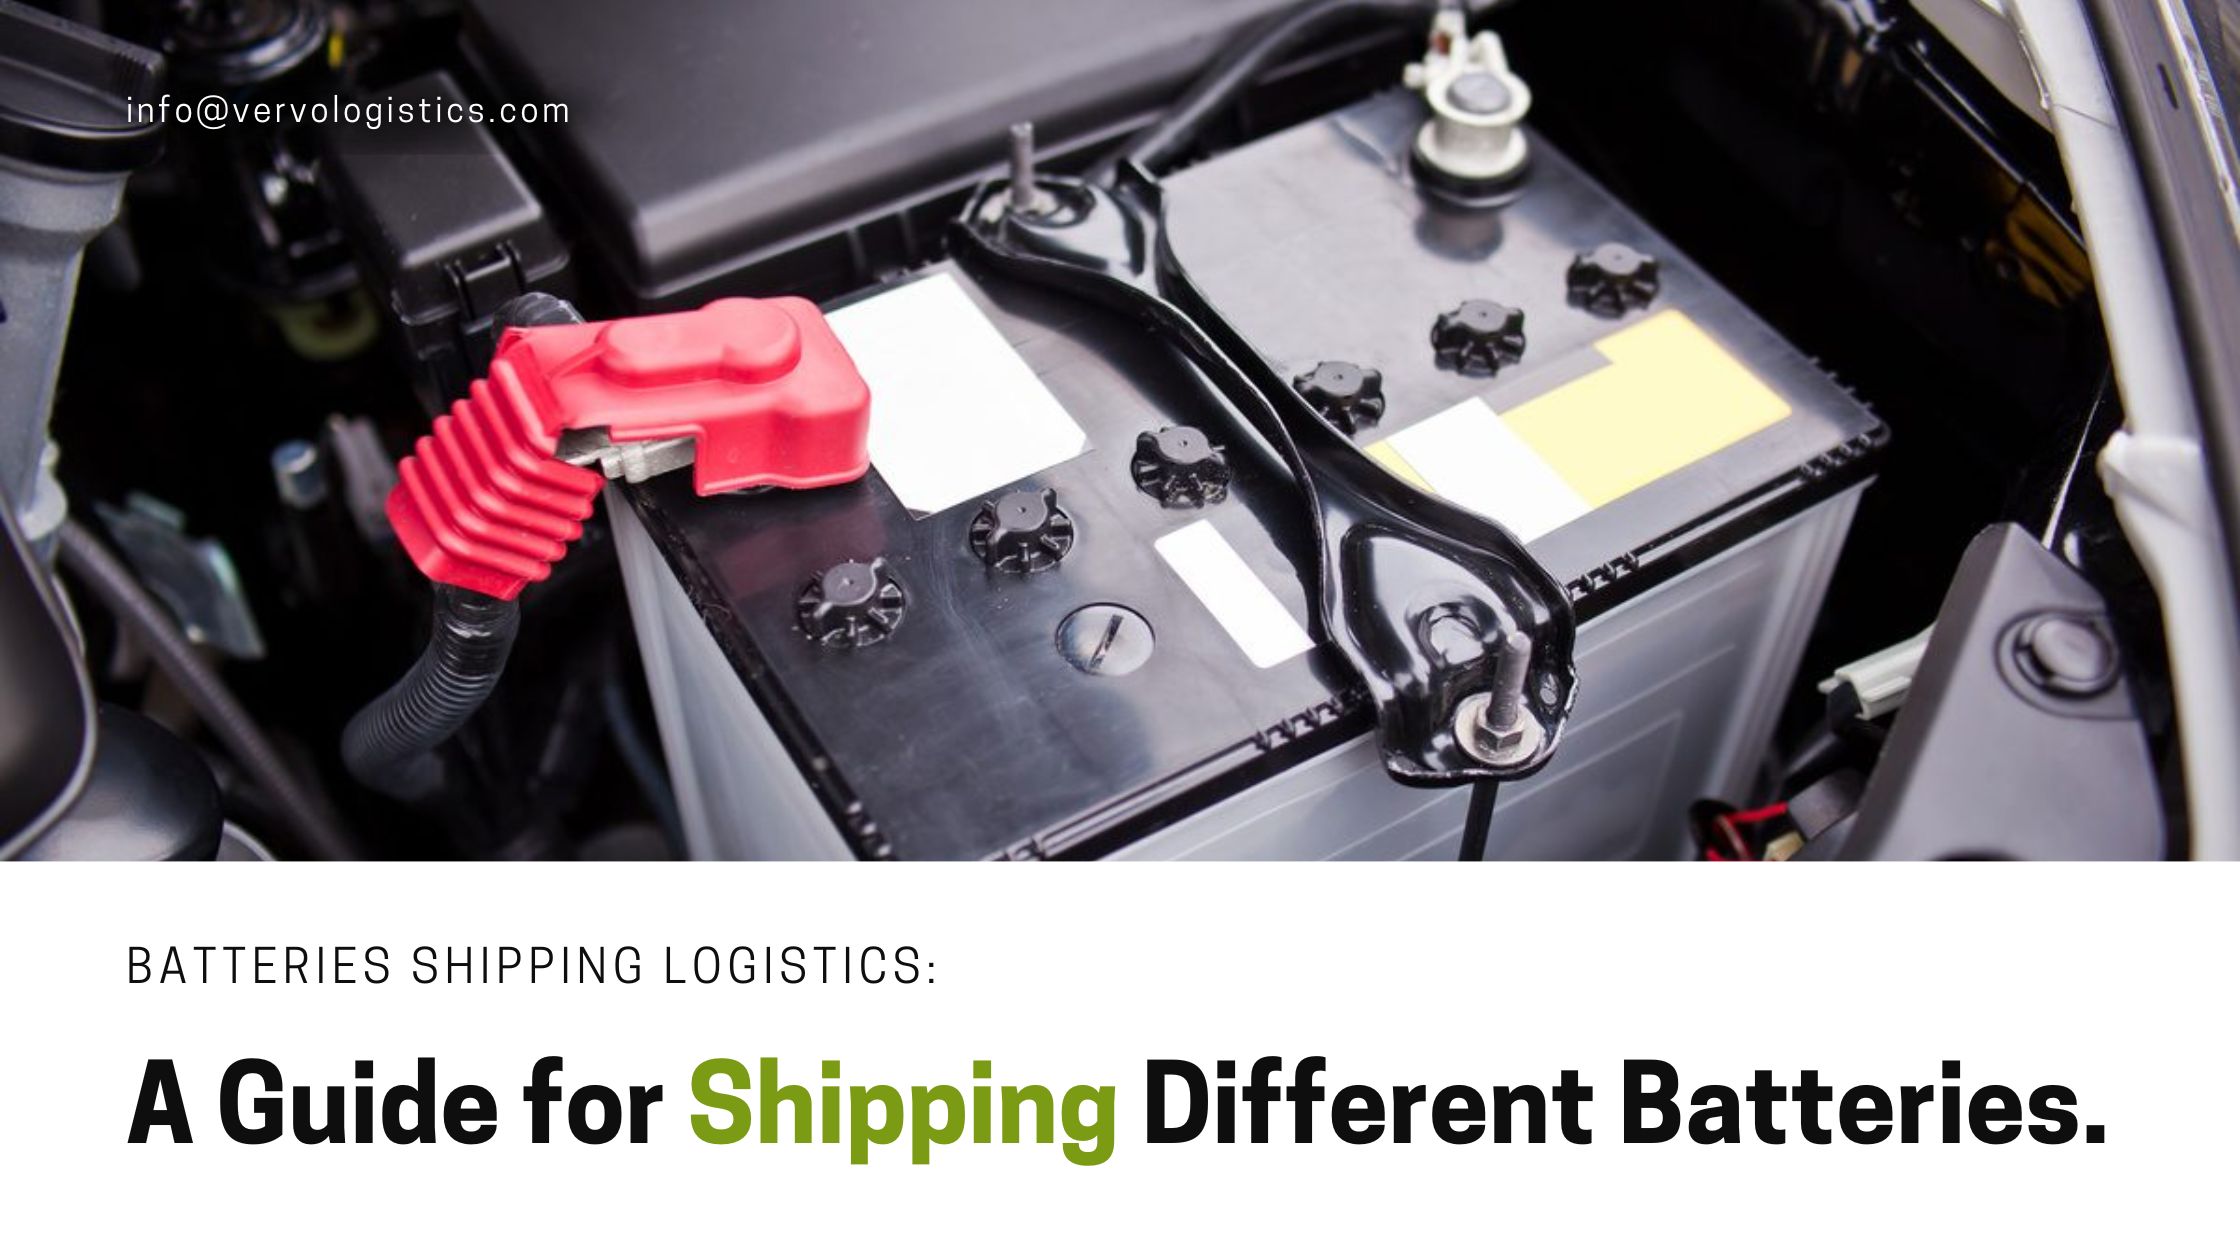 logistics for shipping lithium, lead-acid, alkaline, nickel-metal hydride, coin, and solar batteries by vervo middle east for shipping and logistics services in the uae and worldwide battery shipping services, battery storage services, customs clearance.